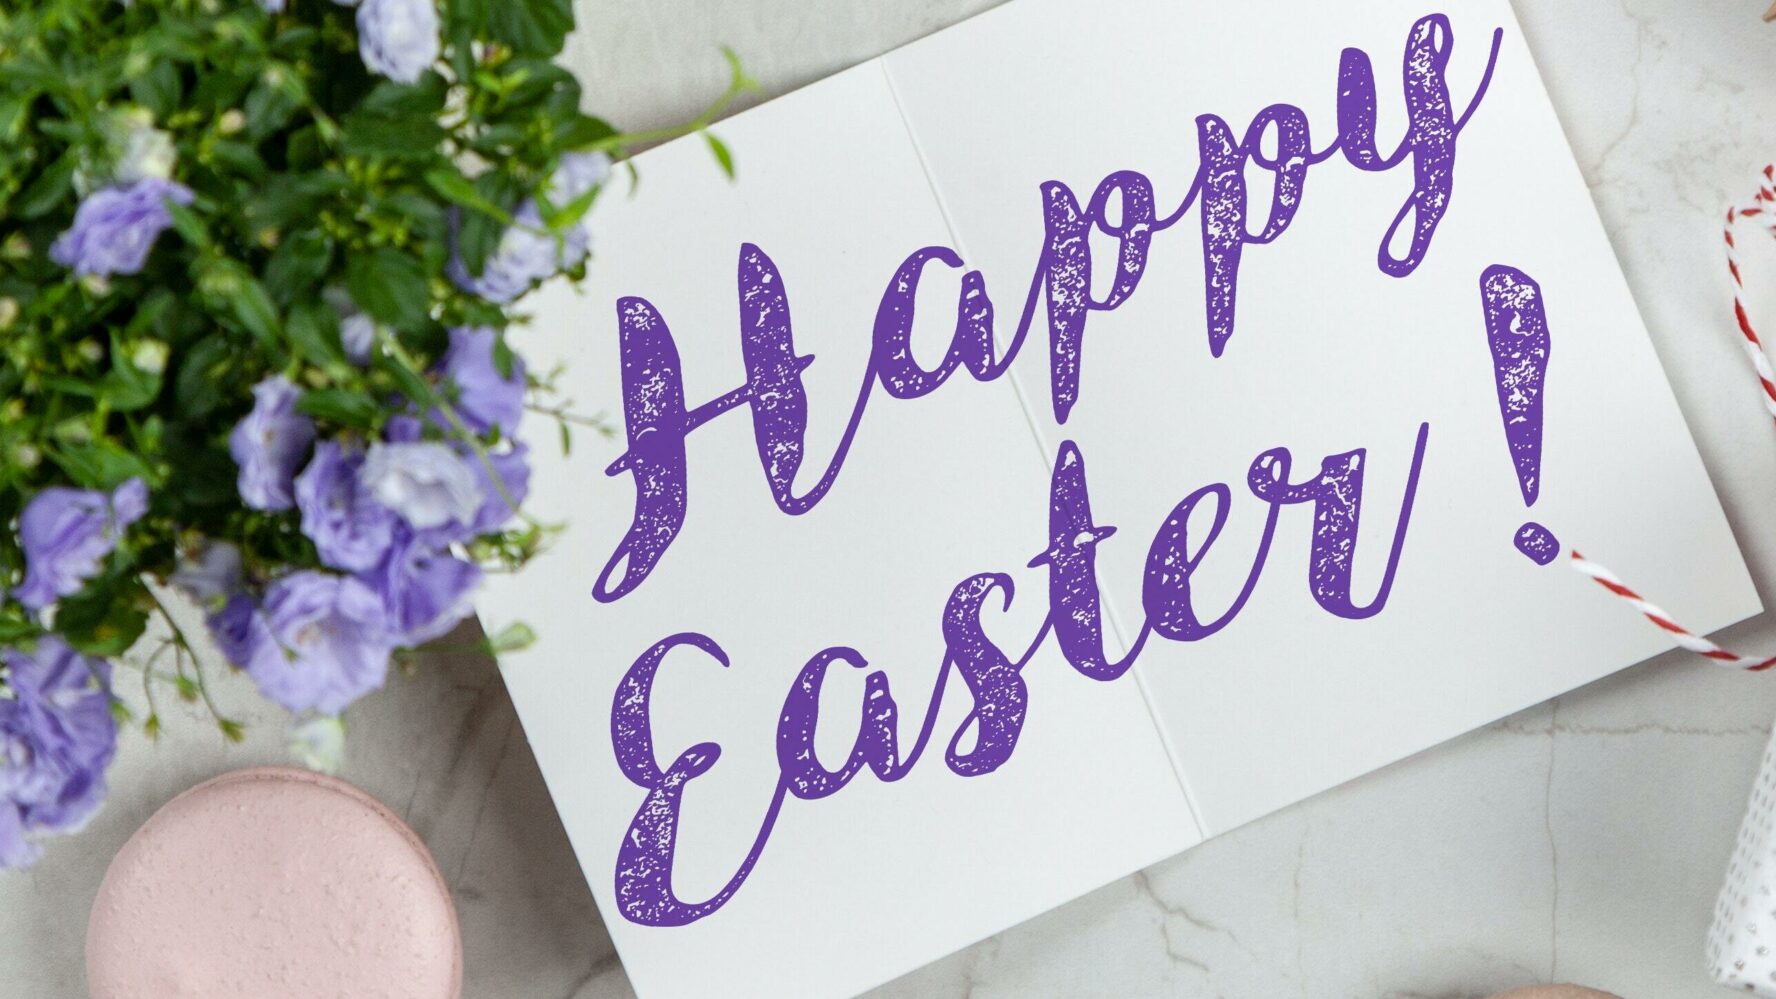 An Easter flat lay on a table with a sign with purple writing saying 'Happy Easter' and some purple flowers.